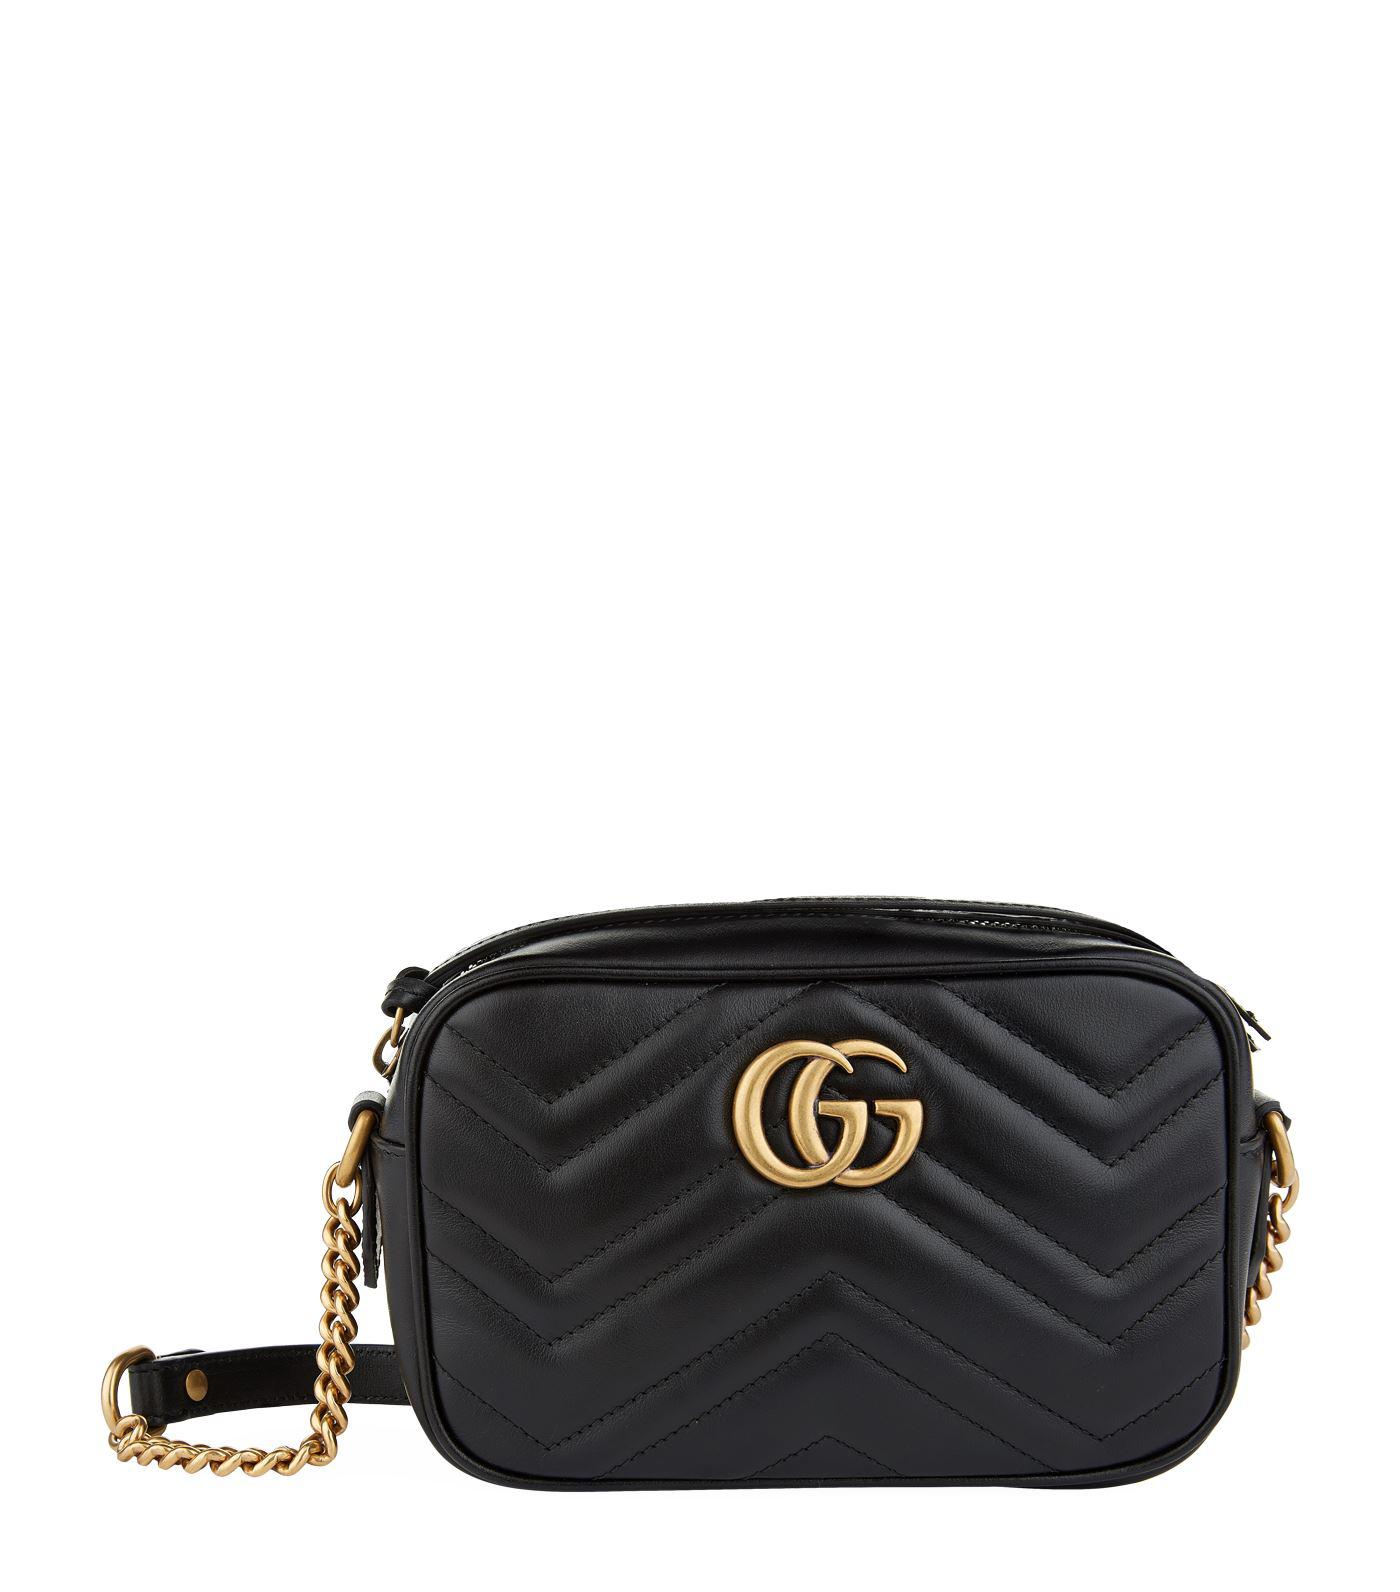 Gucci Leather Mini Marmont Cross Body Bag in Black - Lyst